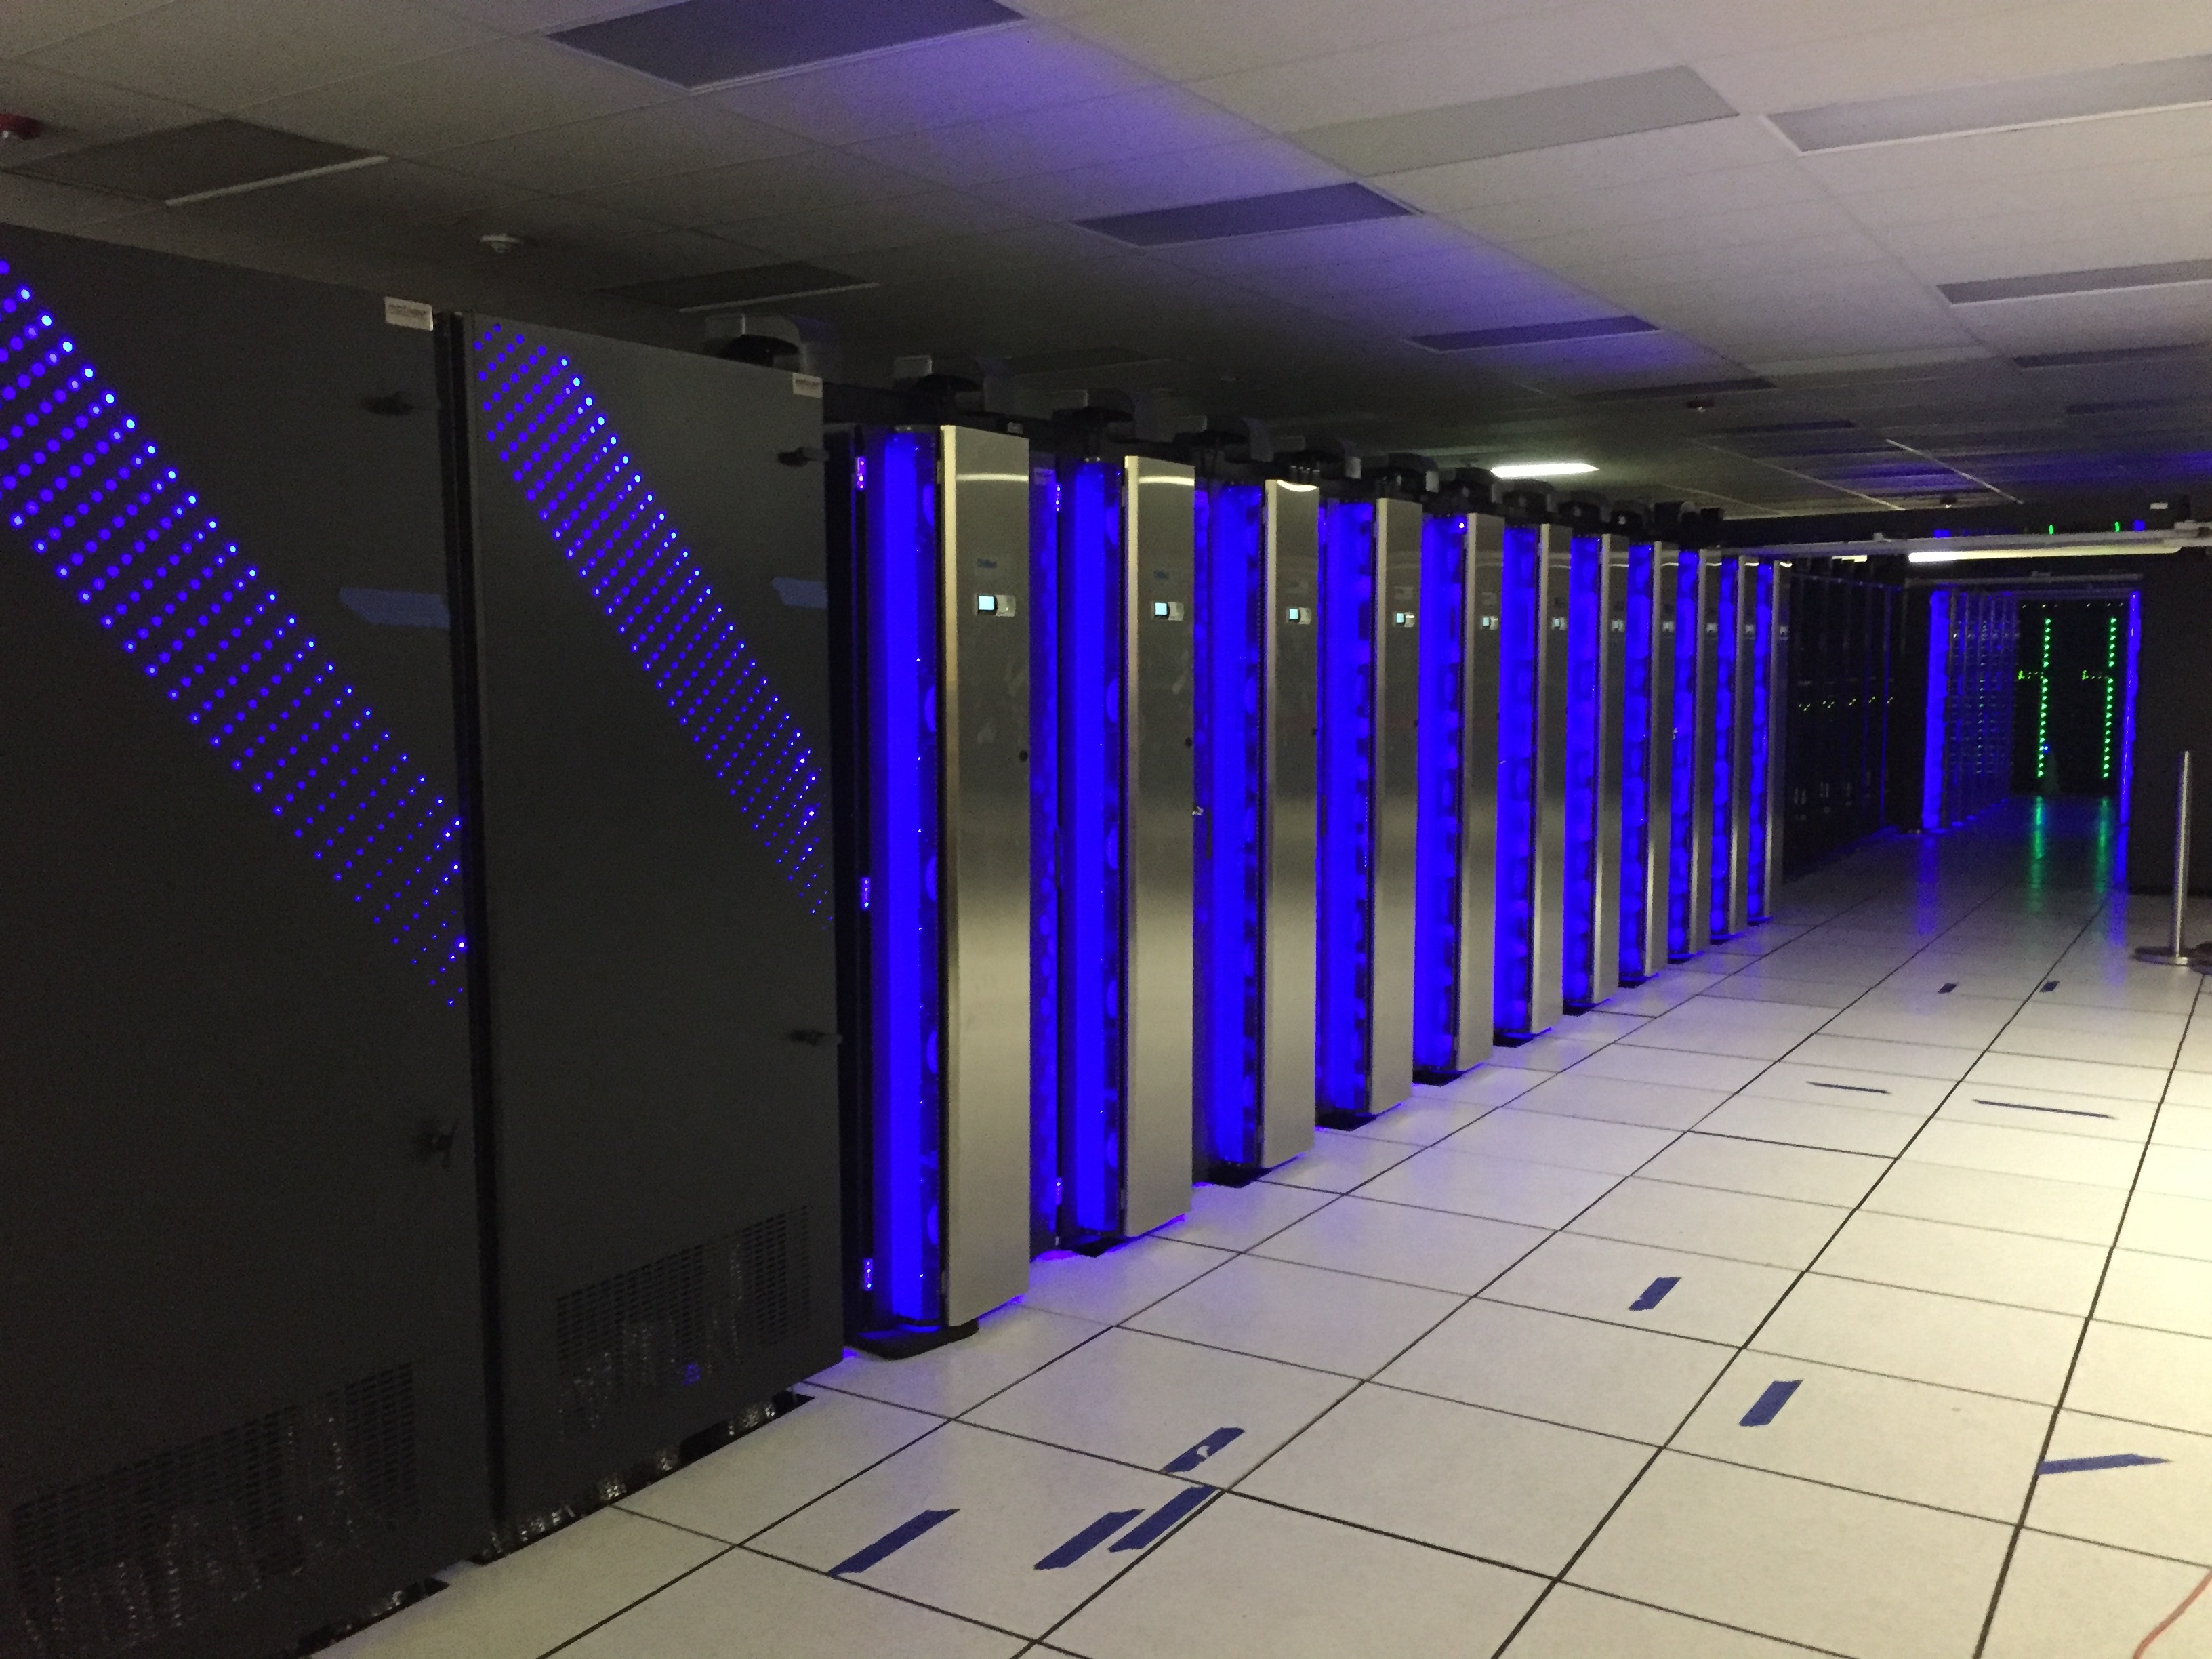 Dell is the latest addition to NOAA's weather and climate operational supercomputing system. This powerful Dell hums alongside NOAA's IBM and Cray computers at a data center in Orlando, Florida. The three systems combined in Florida and Virginia give NOAA 8.4 petaflops of total processing speed and pave the way for improved weather models and forecasts.